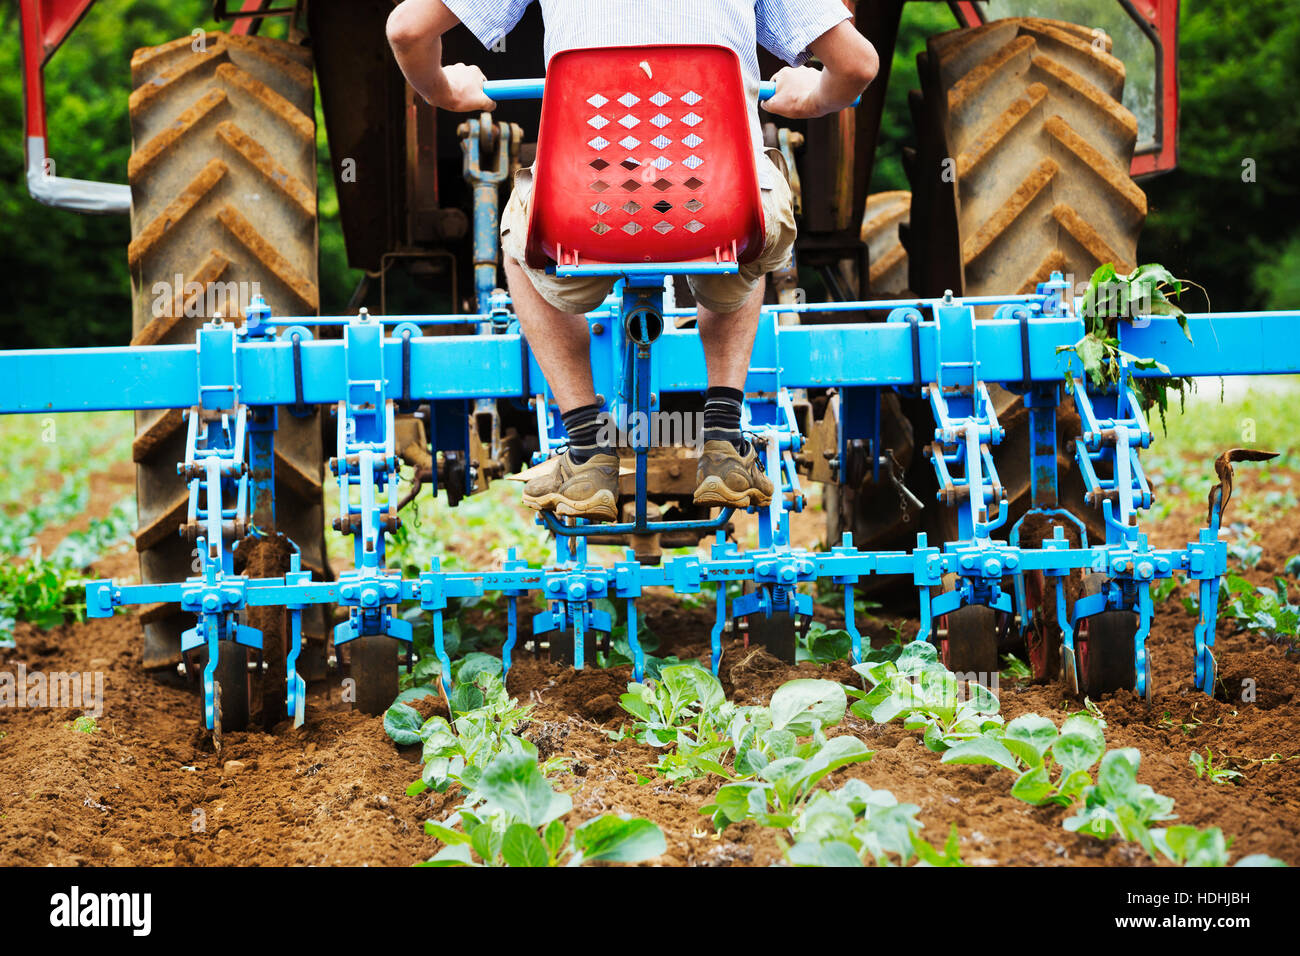 Two men driving a tractor pulling a cultivator weeding between rows of plants. Stock Photo